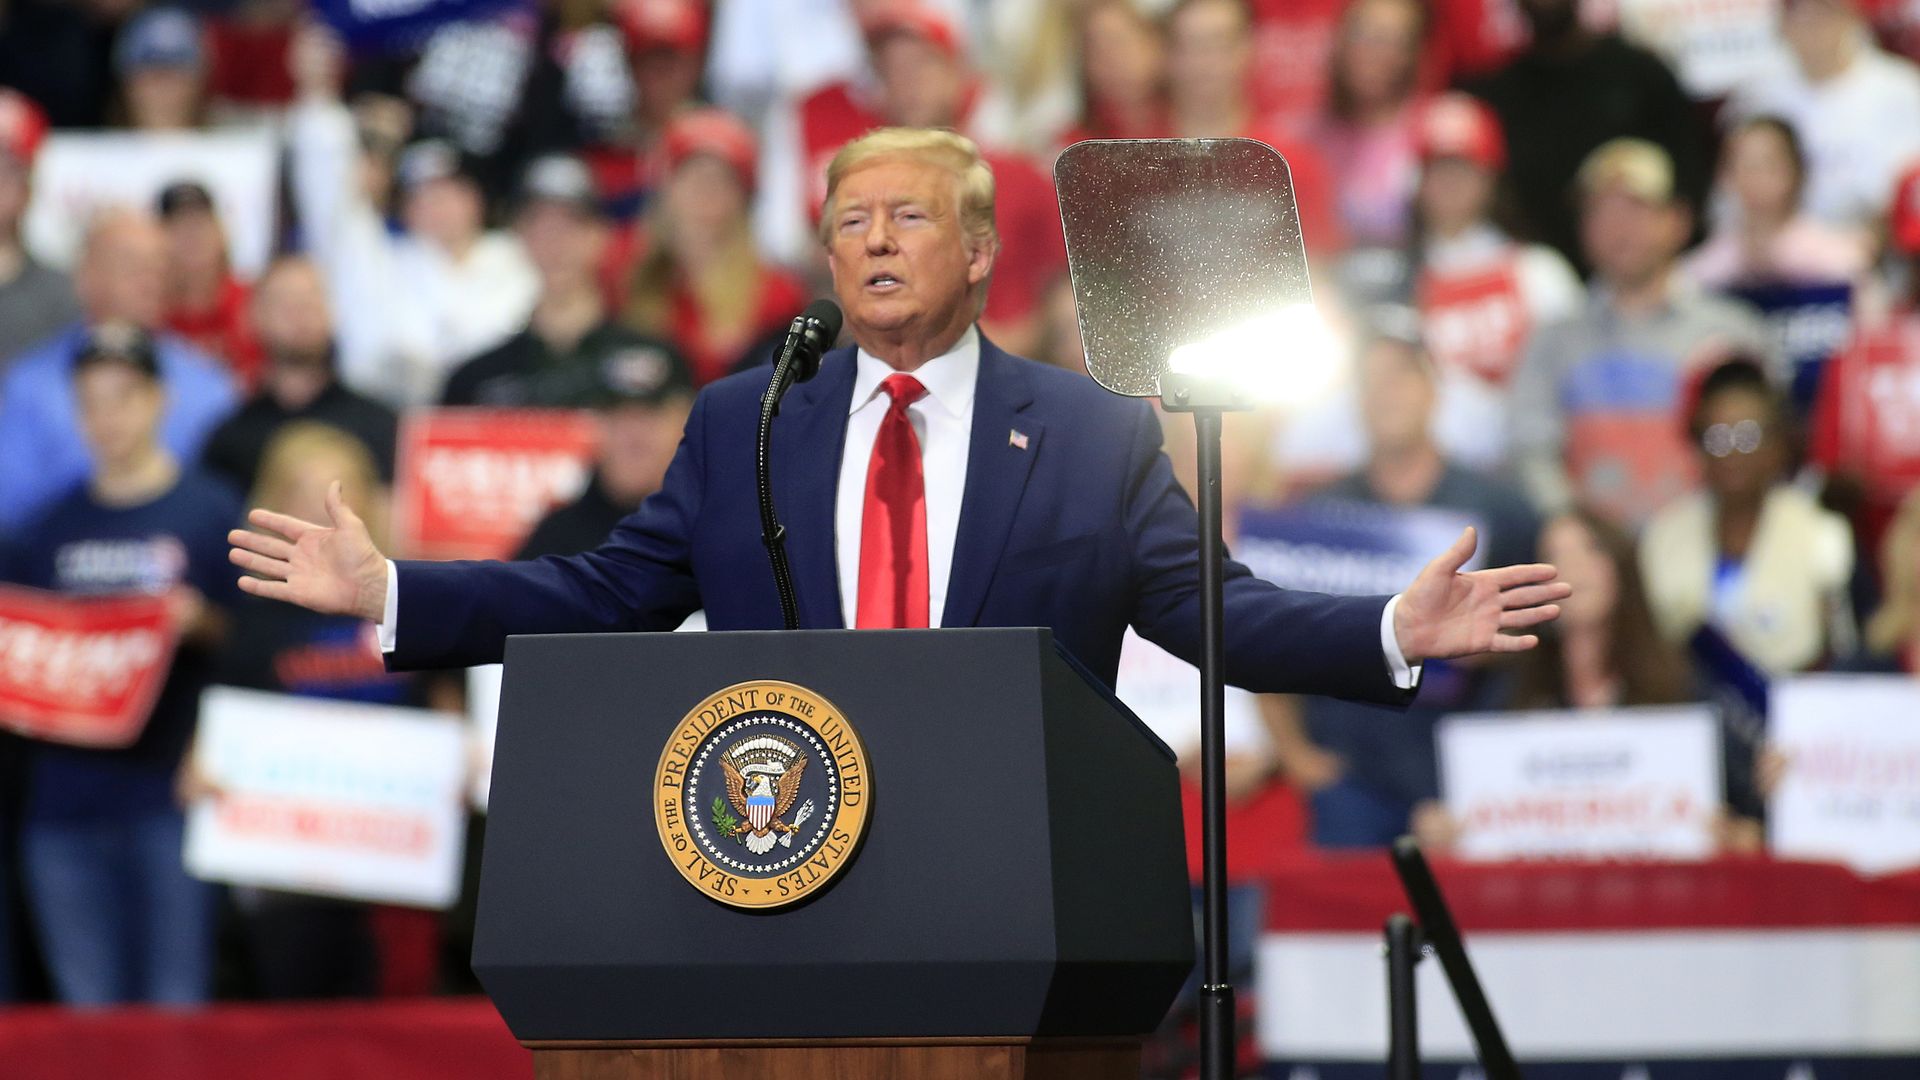 President Donald Trump speaks to supporters during a rally on March 2, 2020 in Charlotte, North Carolina. Trump was campaigning ahead of Super Tuesday. (Photo by Brian Blanco/Getty Images)